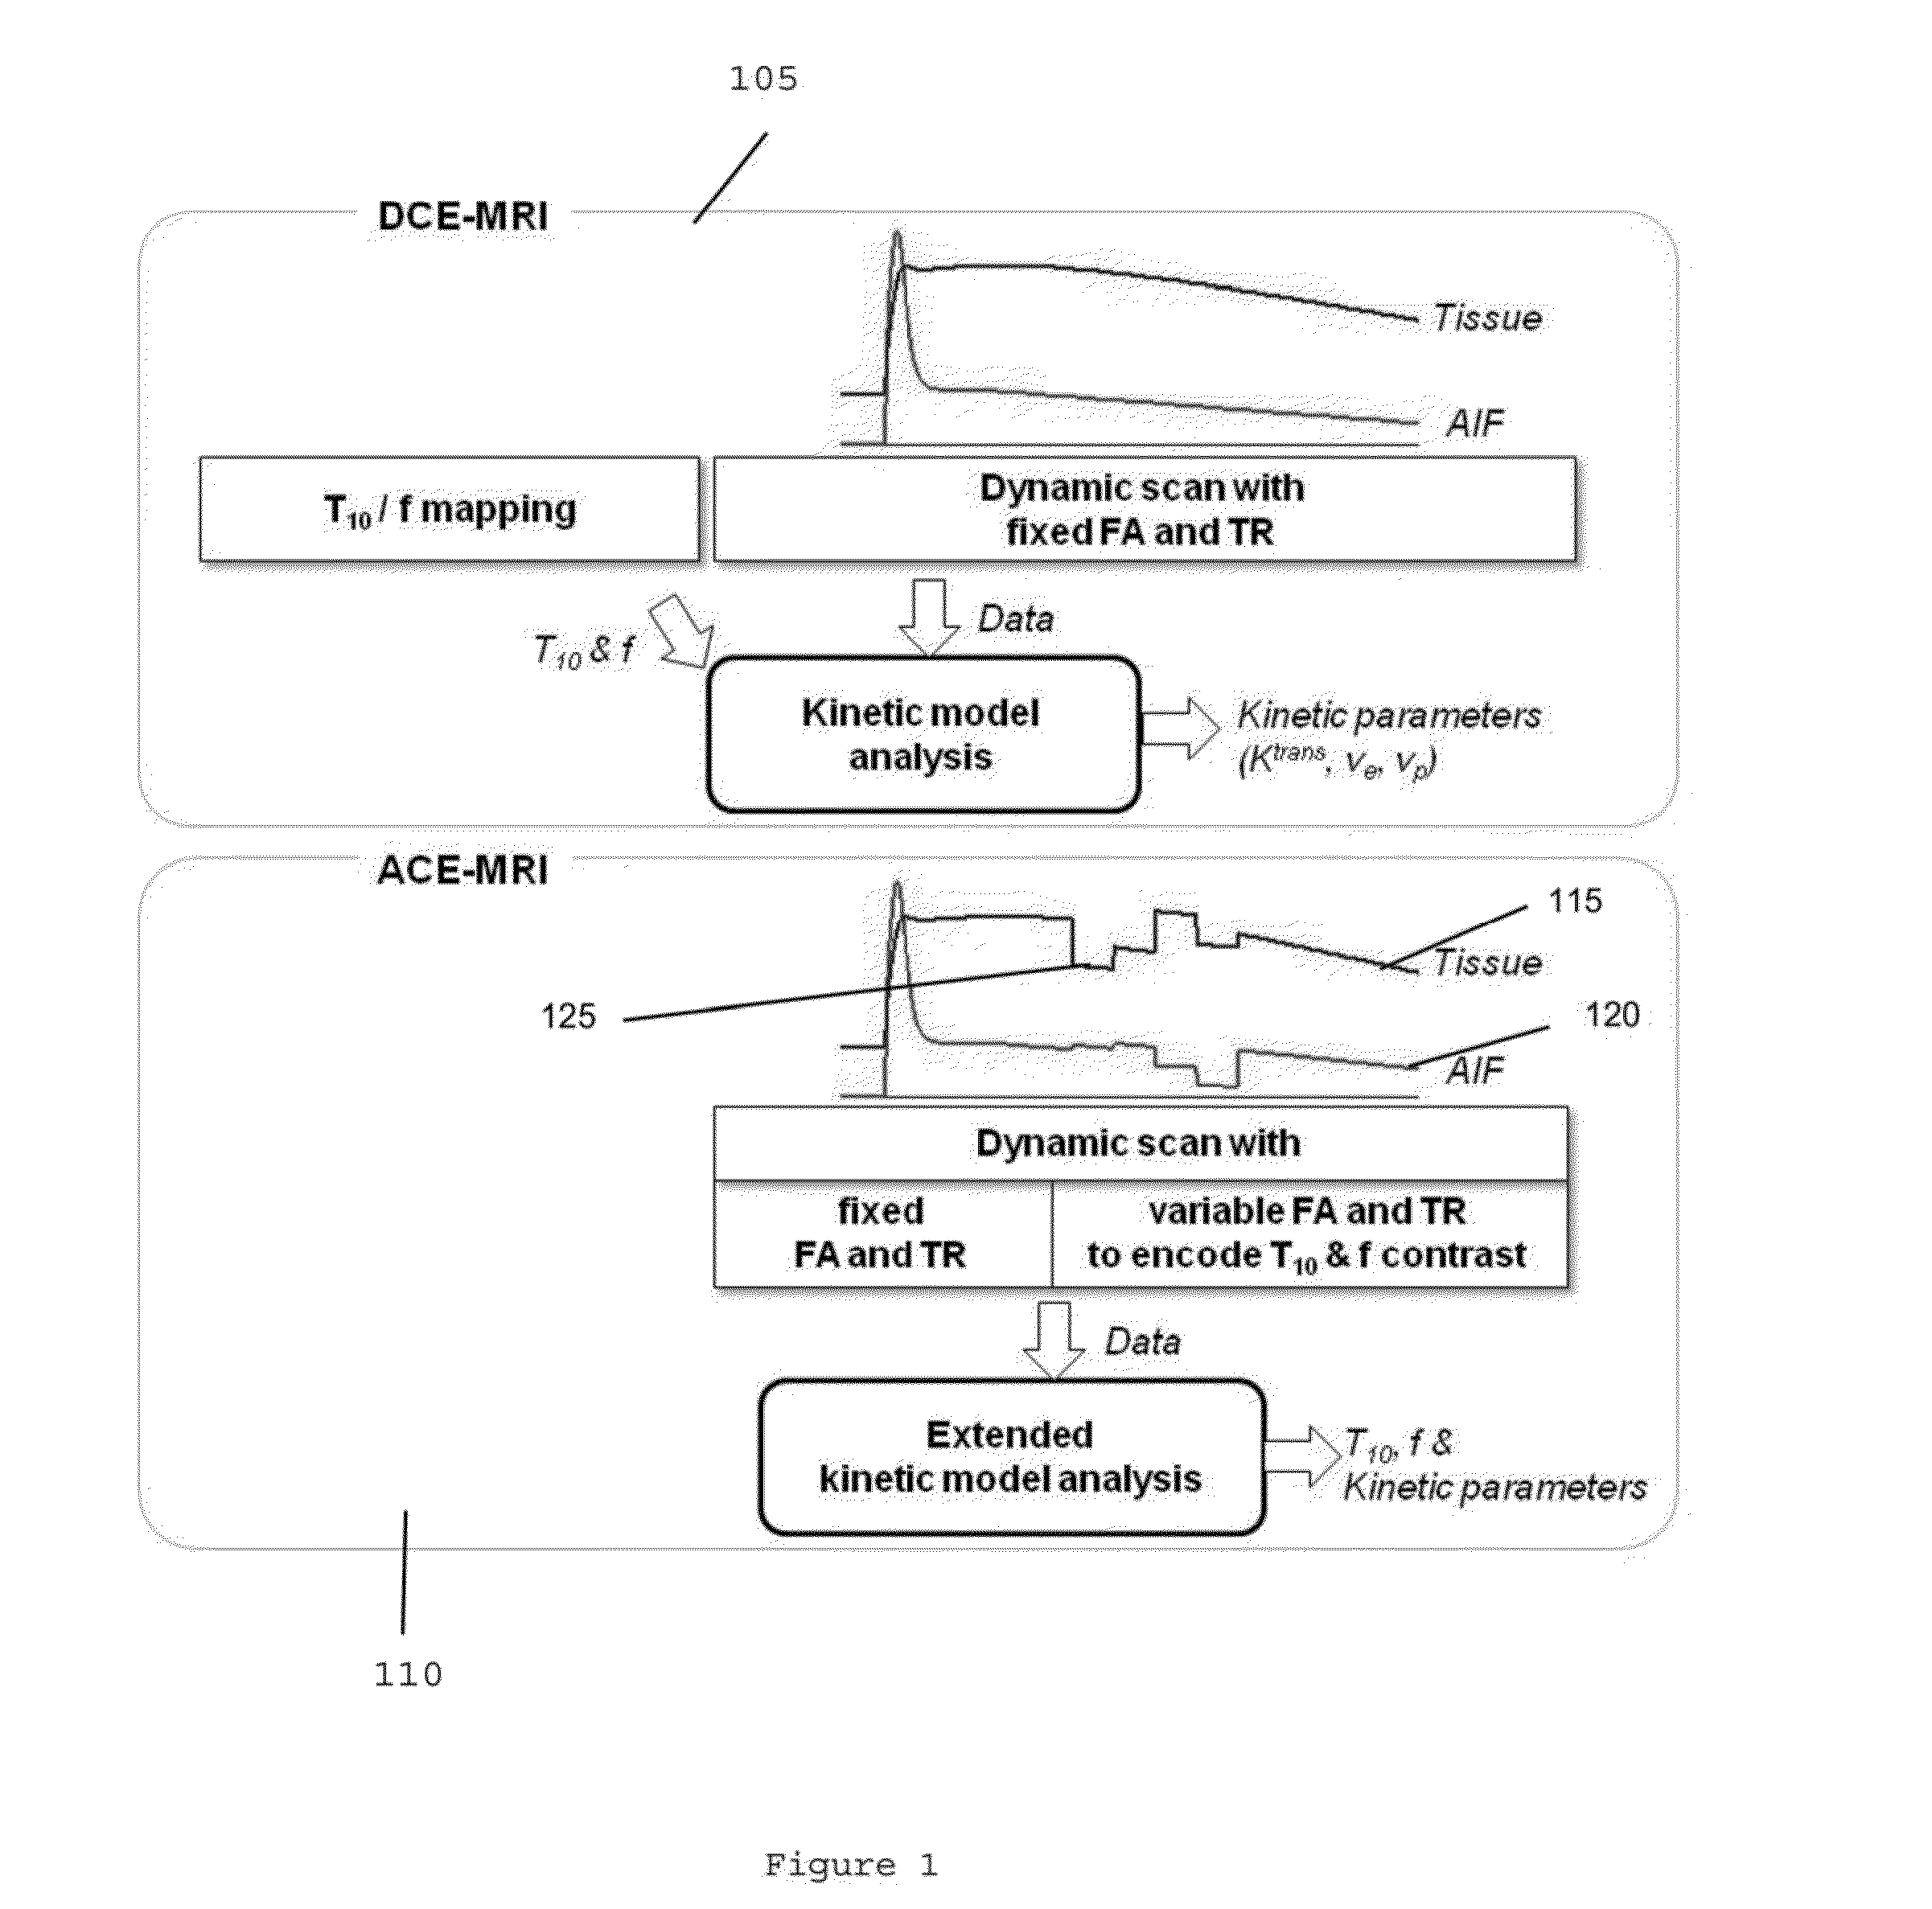 System, method, and computer-accessible medium for determining at least one characteristic of at least one tissue or at least one MRI measurement condition of the at least one tissue using active contrast encoding magnetic resonance imaging procedure(s)